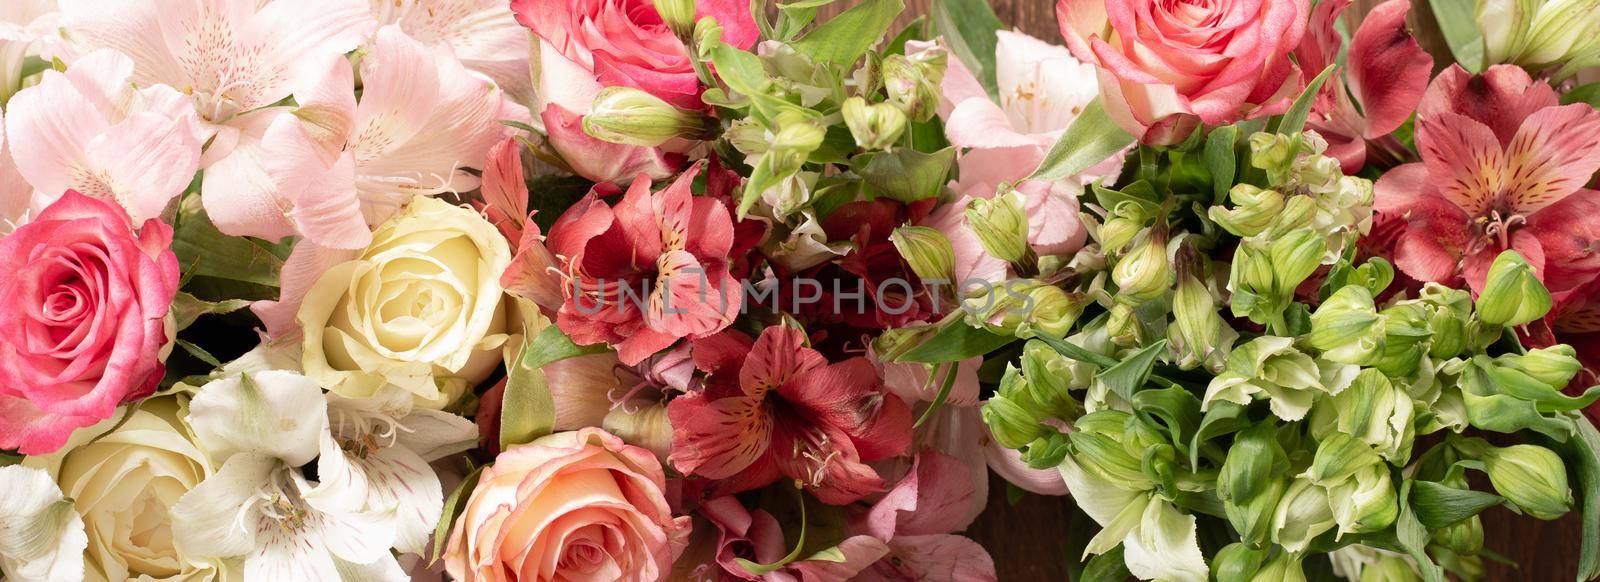 Flowers border composition. Alstroemeria Flowers, roses. Flat lay top view